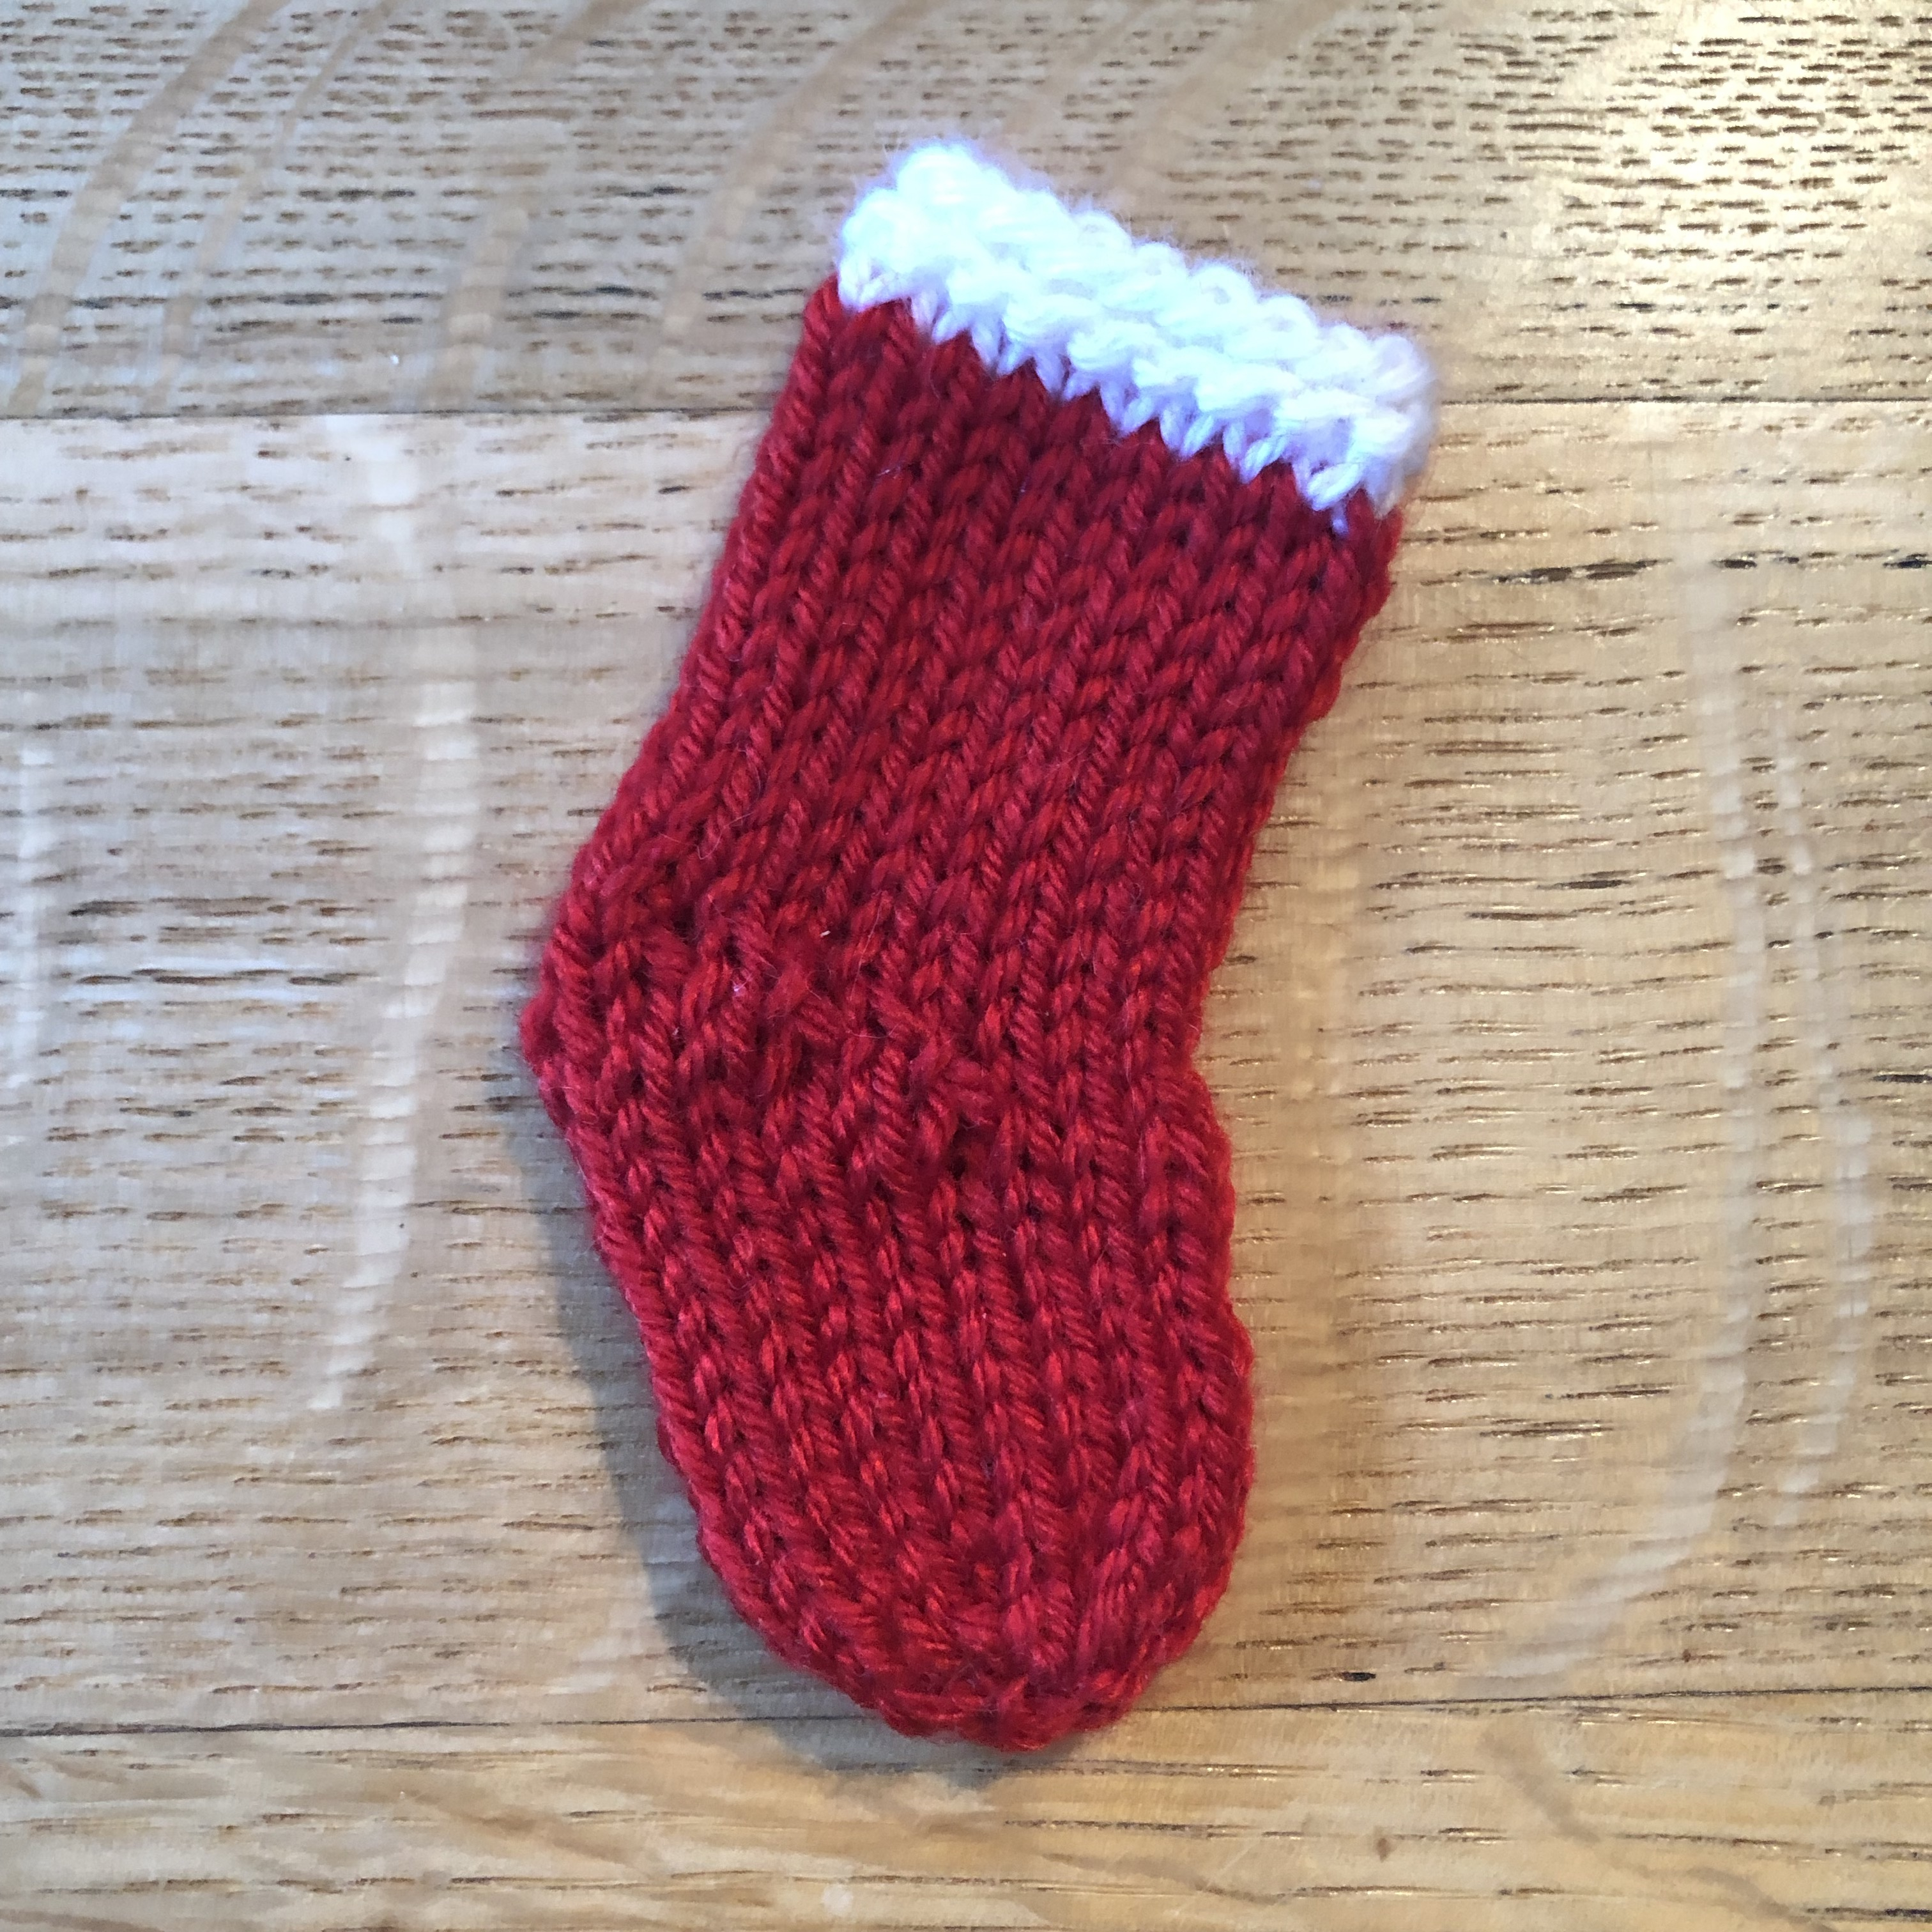 Christmas Stocking Knitting Patterns How To Knit A Little Christmas Stocking Marni Made It